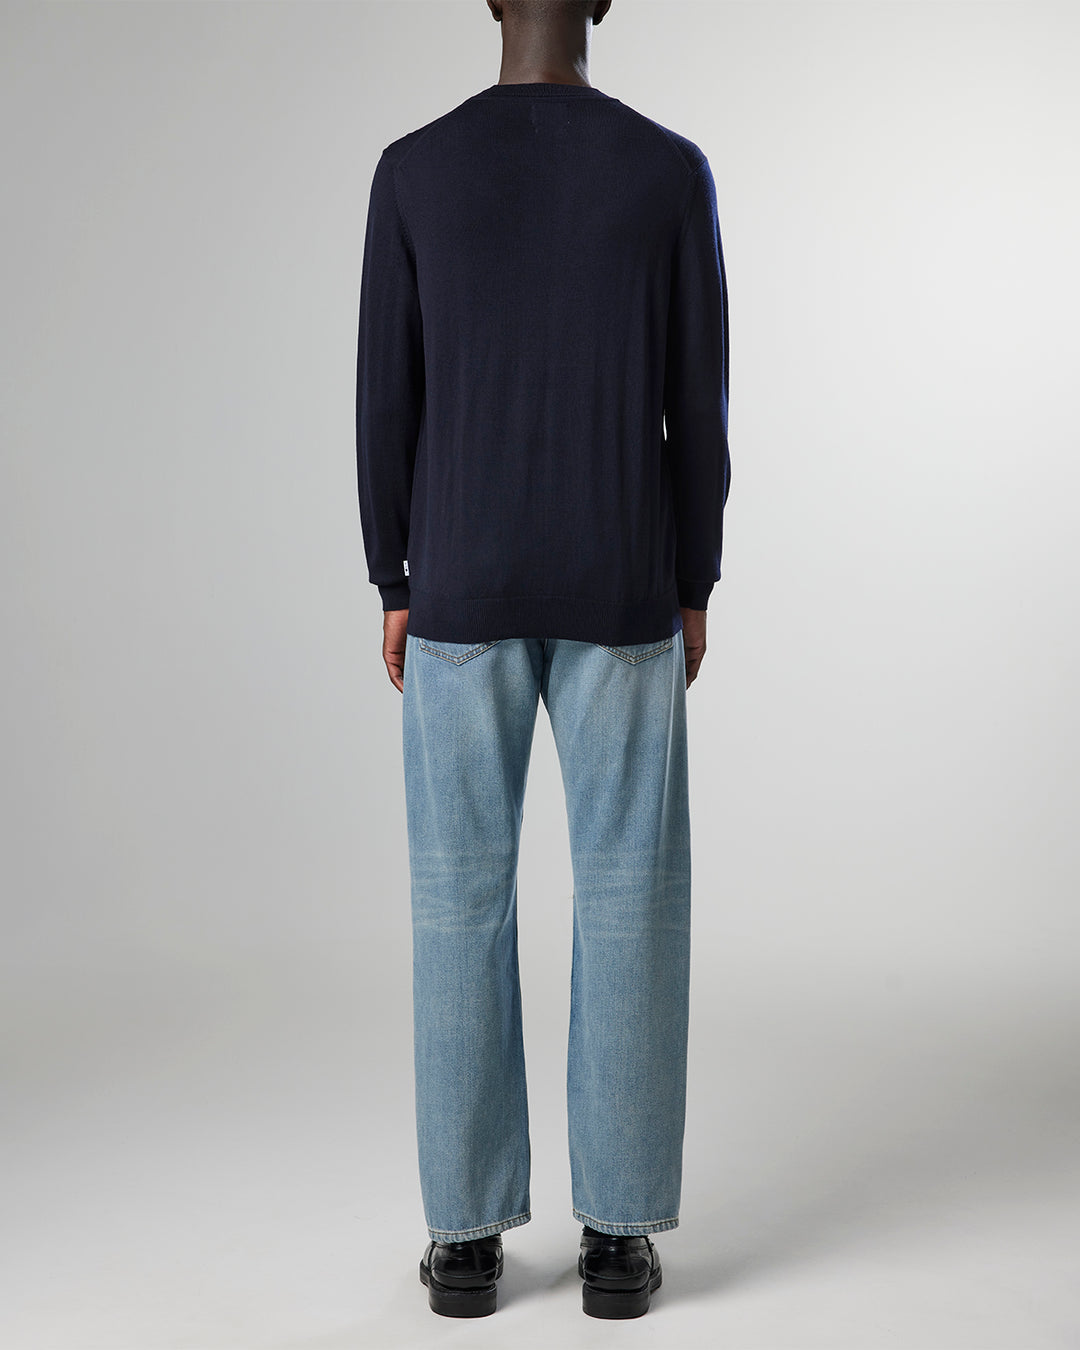 NN07 - Ted 6328 Merino Wool Sweater in Navy | Buster McGee